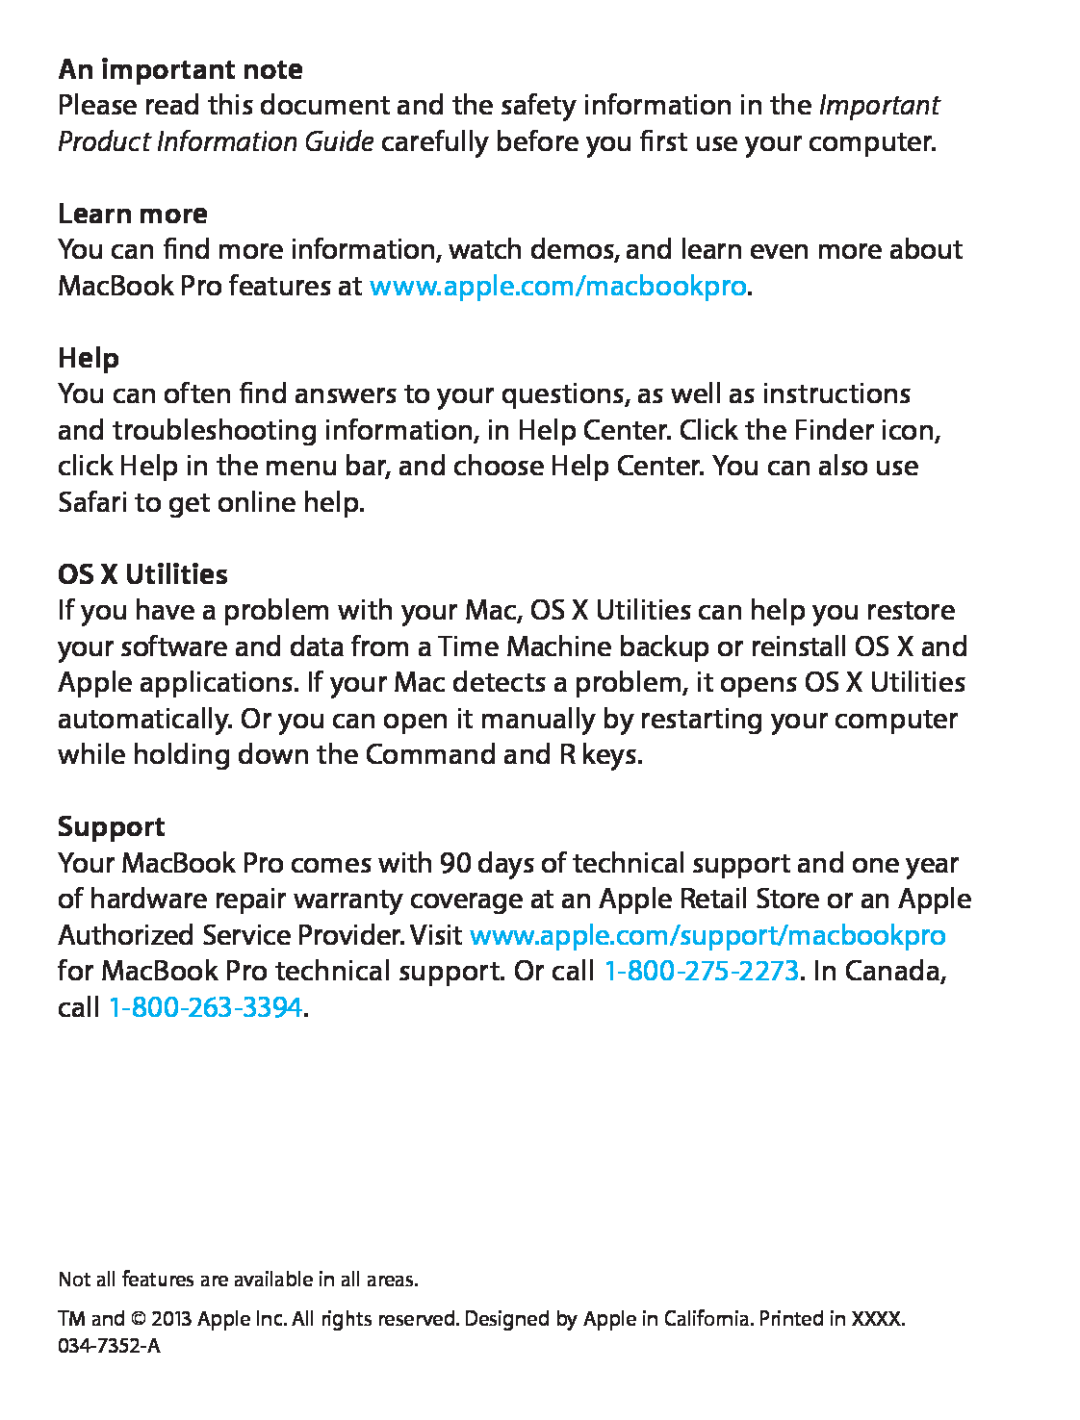 Apple ME665LL/A, ME864LL/A, ME294LL/A, MD102LL/A, MD212LL/A An important note, Learn more, Help, OS X Utilities, Support 